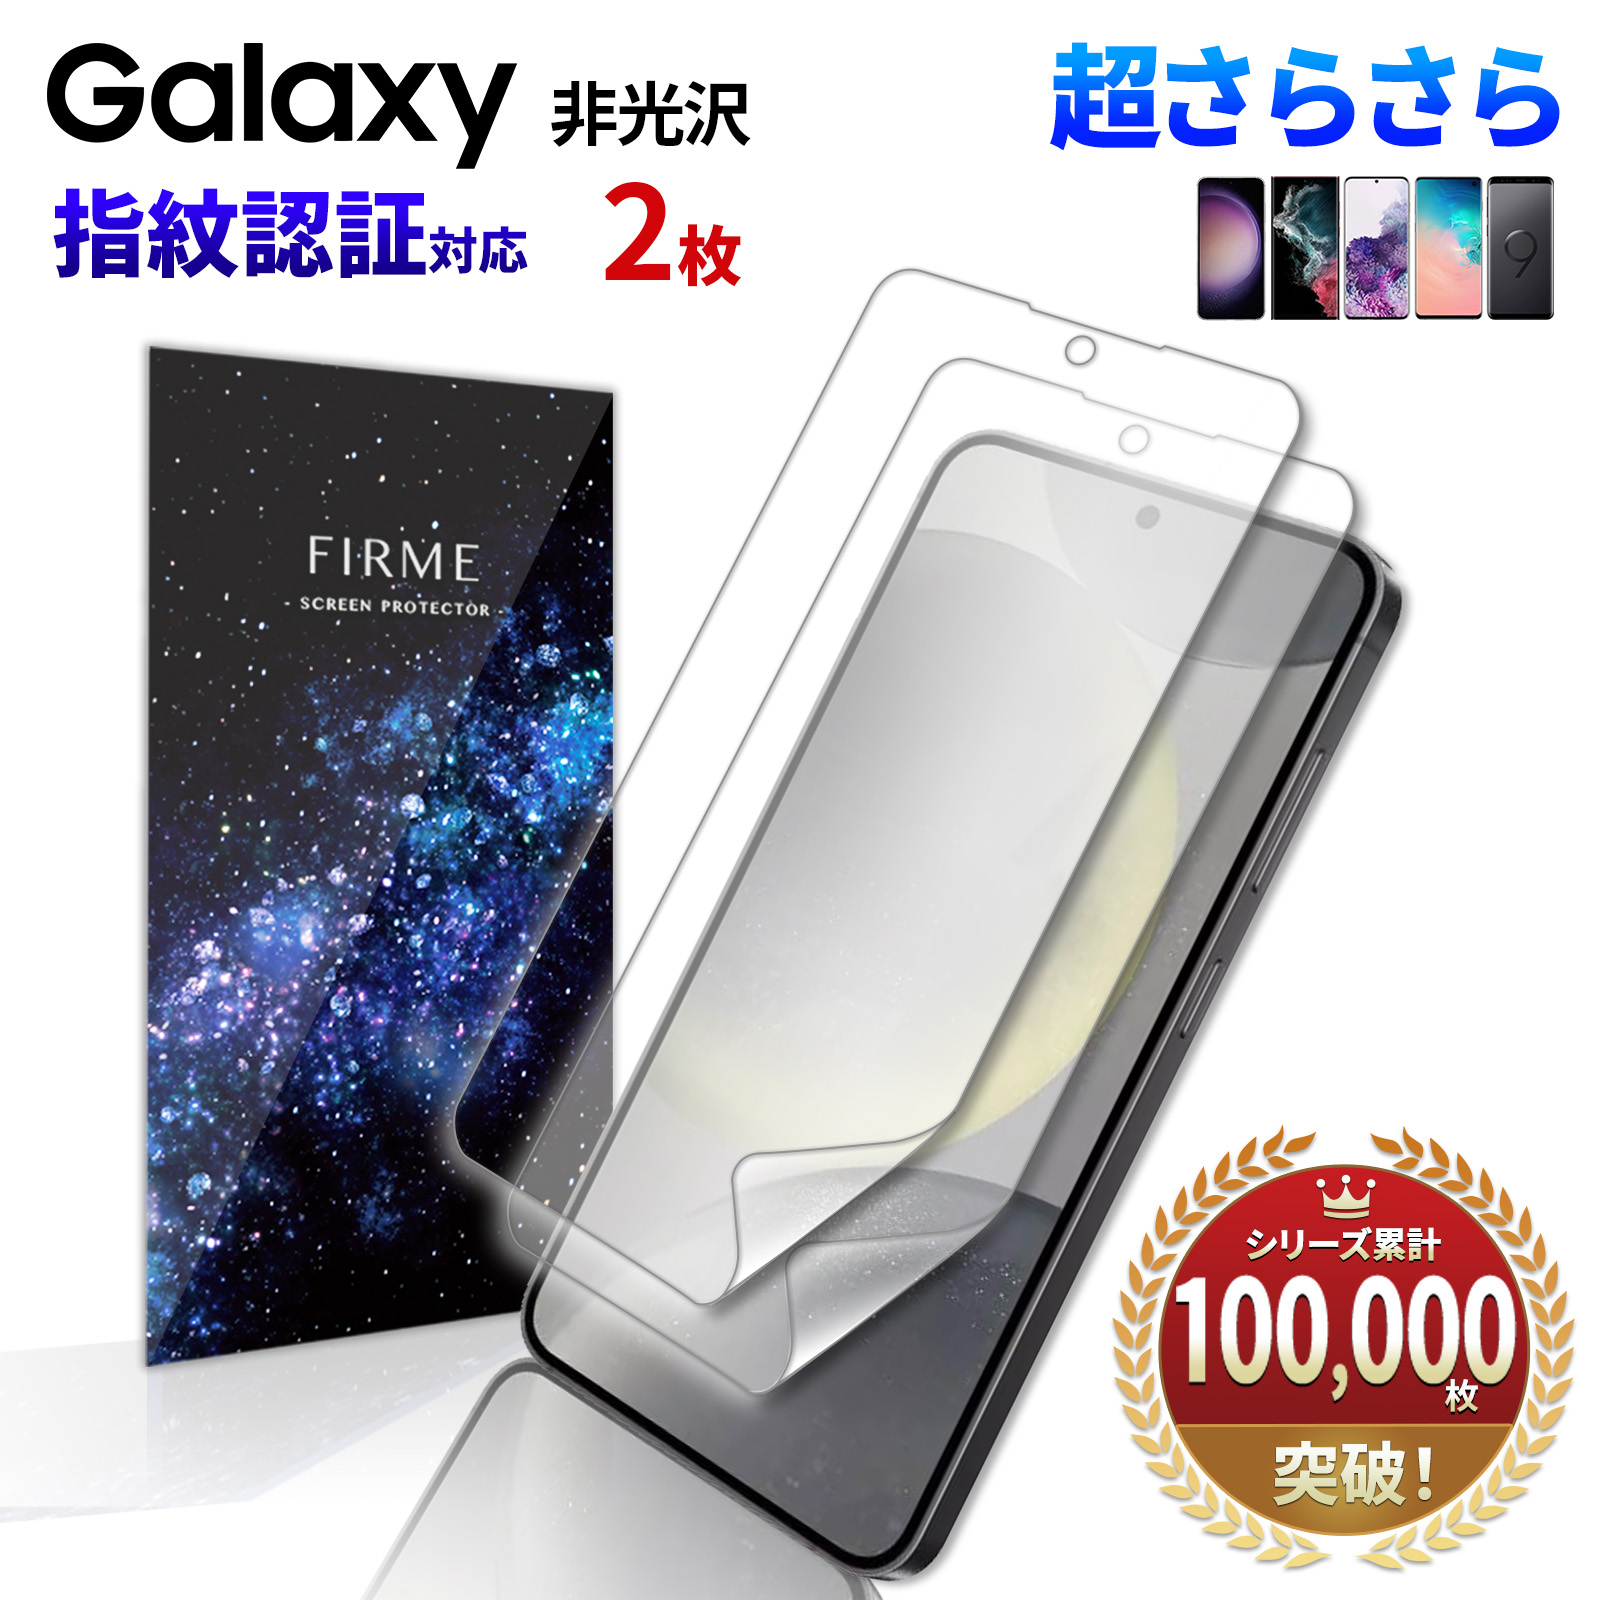 galaxy S24 Ultra フィルム 指紋 認証 アンチグレア 非光沢 S23 ultra S22 S21 S20 + plus S10 S9 ギャラクシー 全面 保護 割れない TPU 画面 保護 曲面 クリア｜mywaysmart